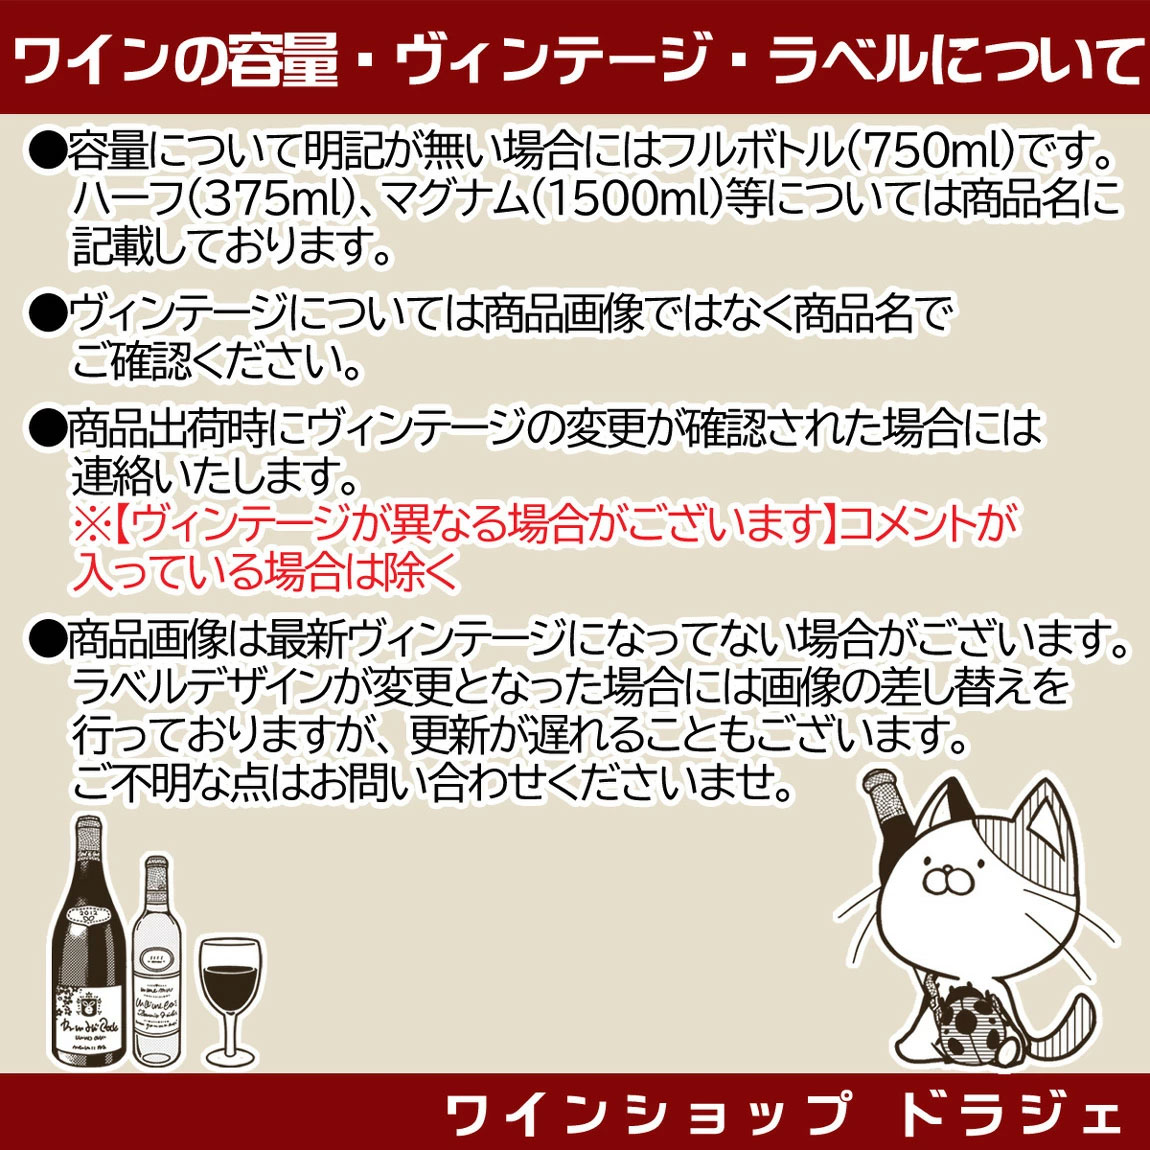 smEO@2021@LOEGXe[g@@<br>Pinot Gris / King Estate  Xs[ho